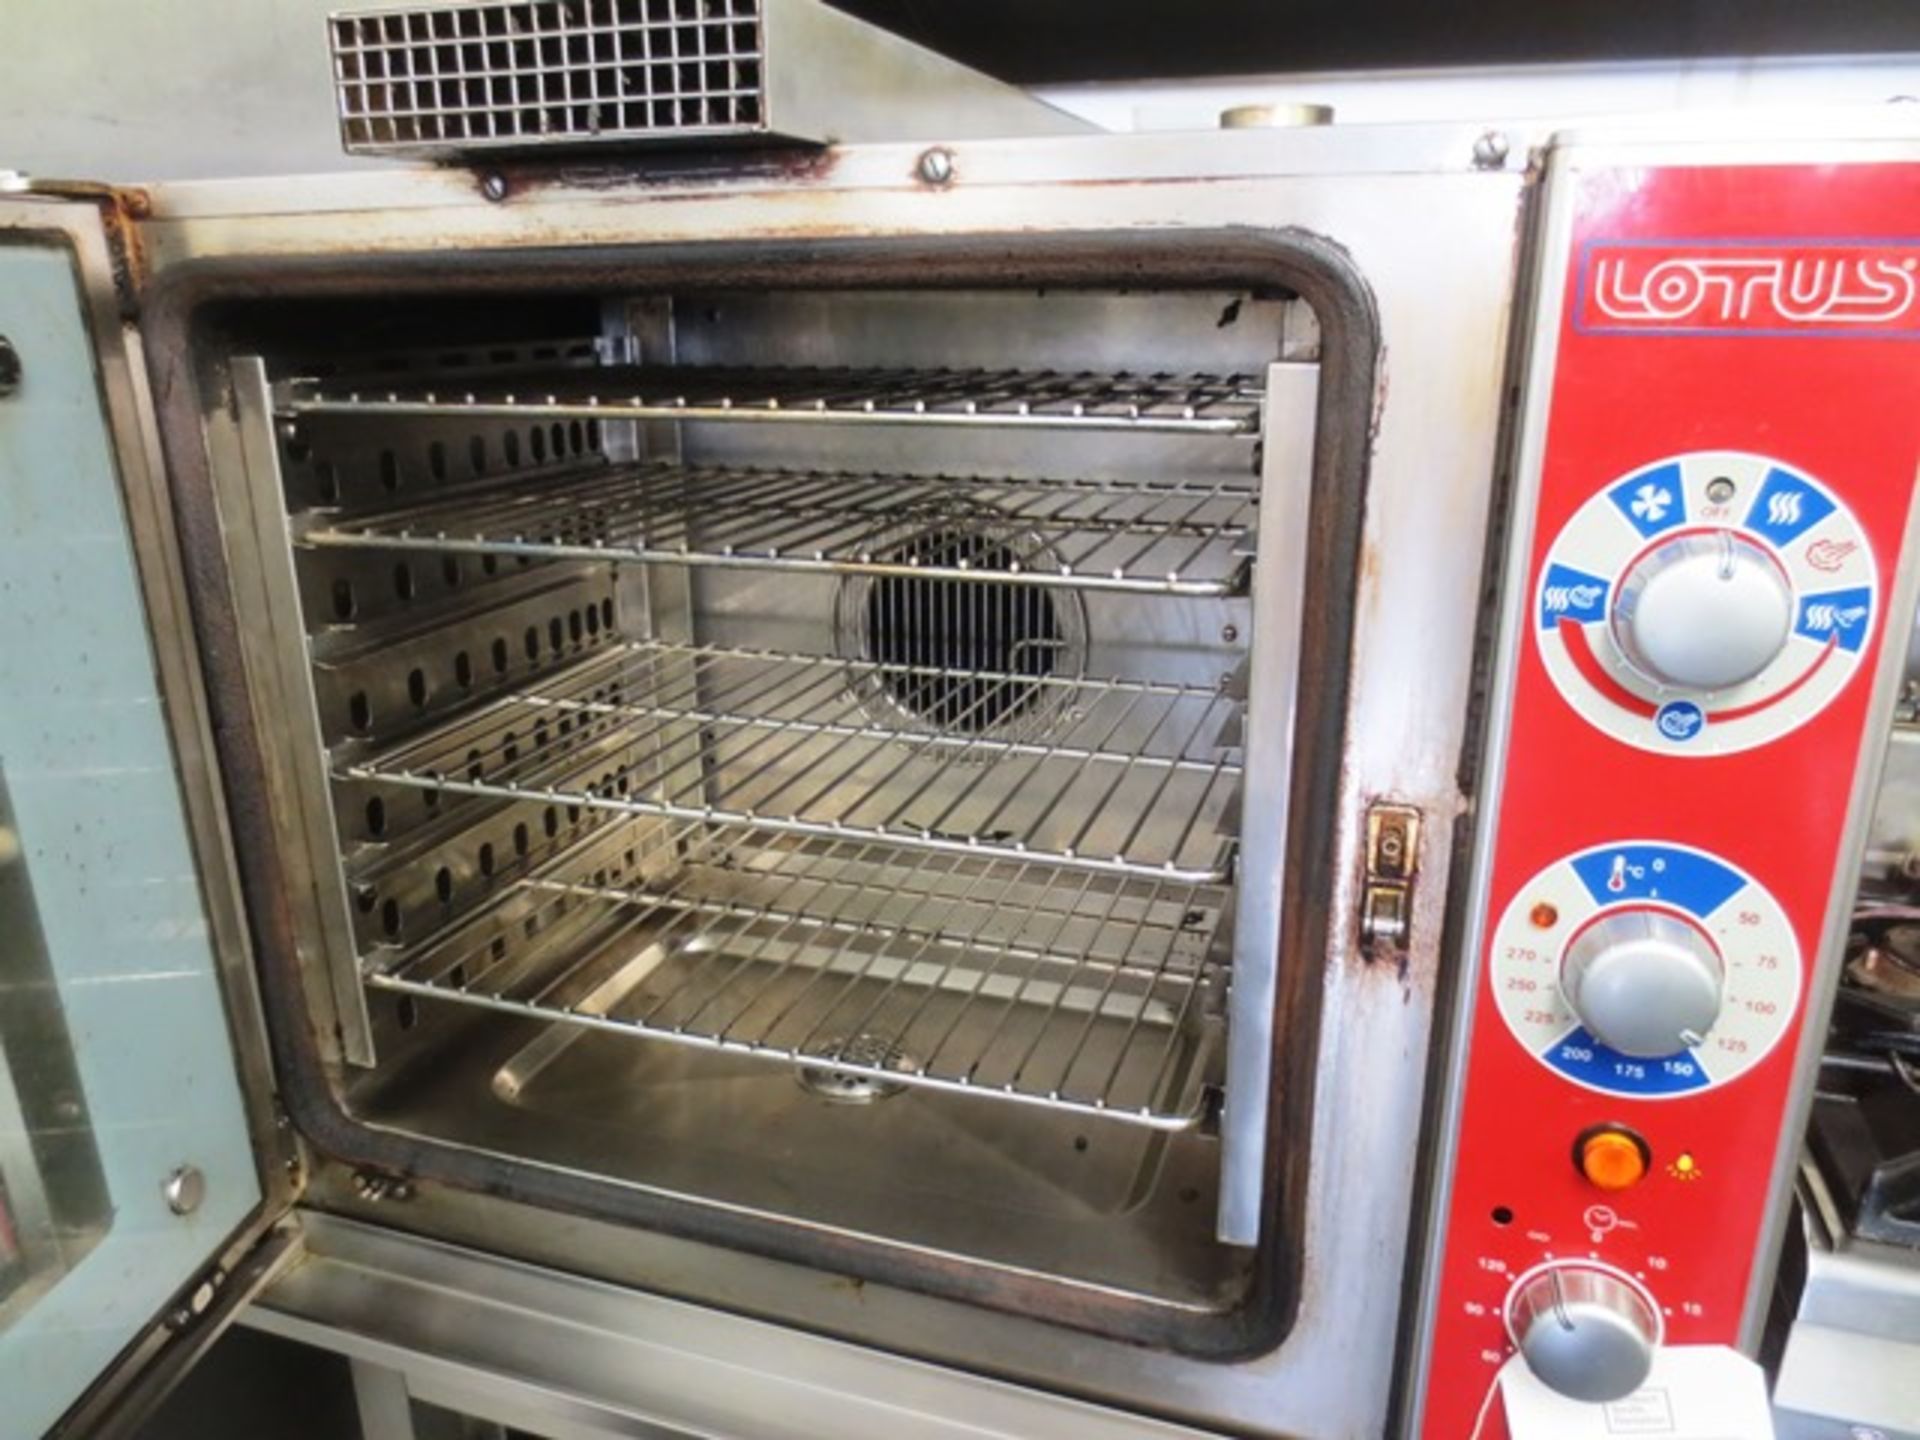 Lotus stainless steel glass fronted combi oven (3 phase), approx dimensions: 880 x 880 x 880mm ( - Image 3 of 4